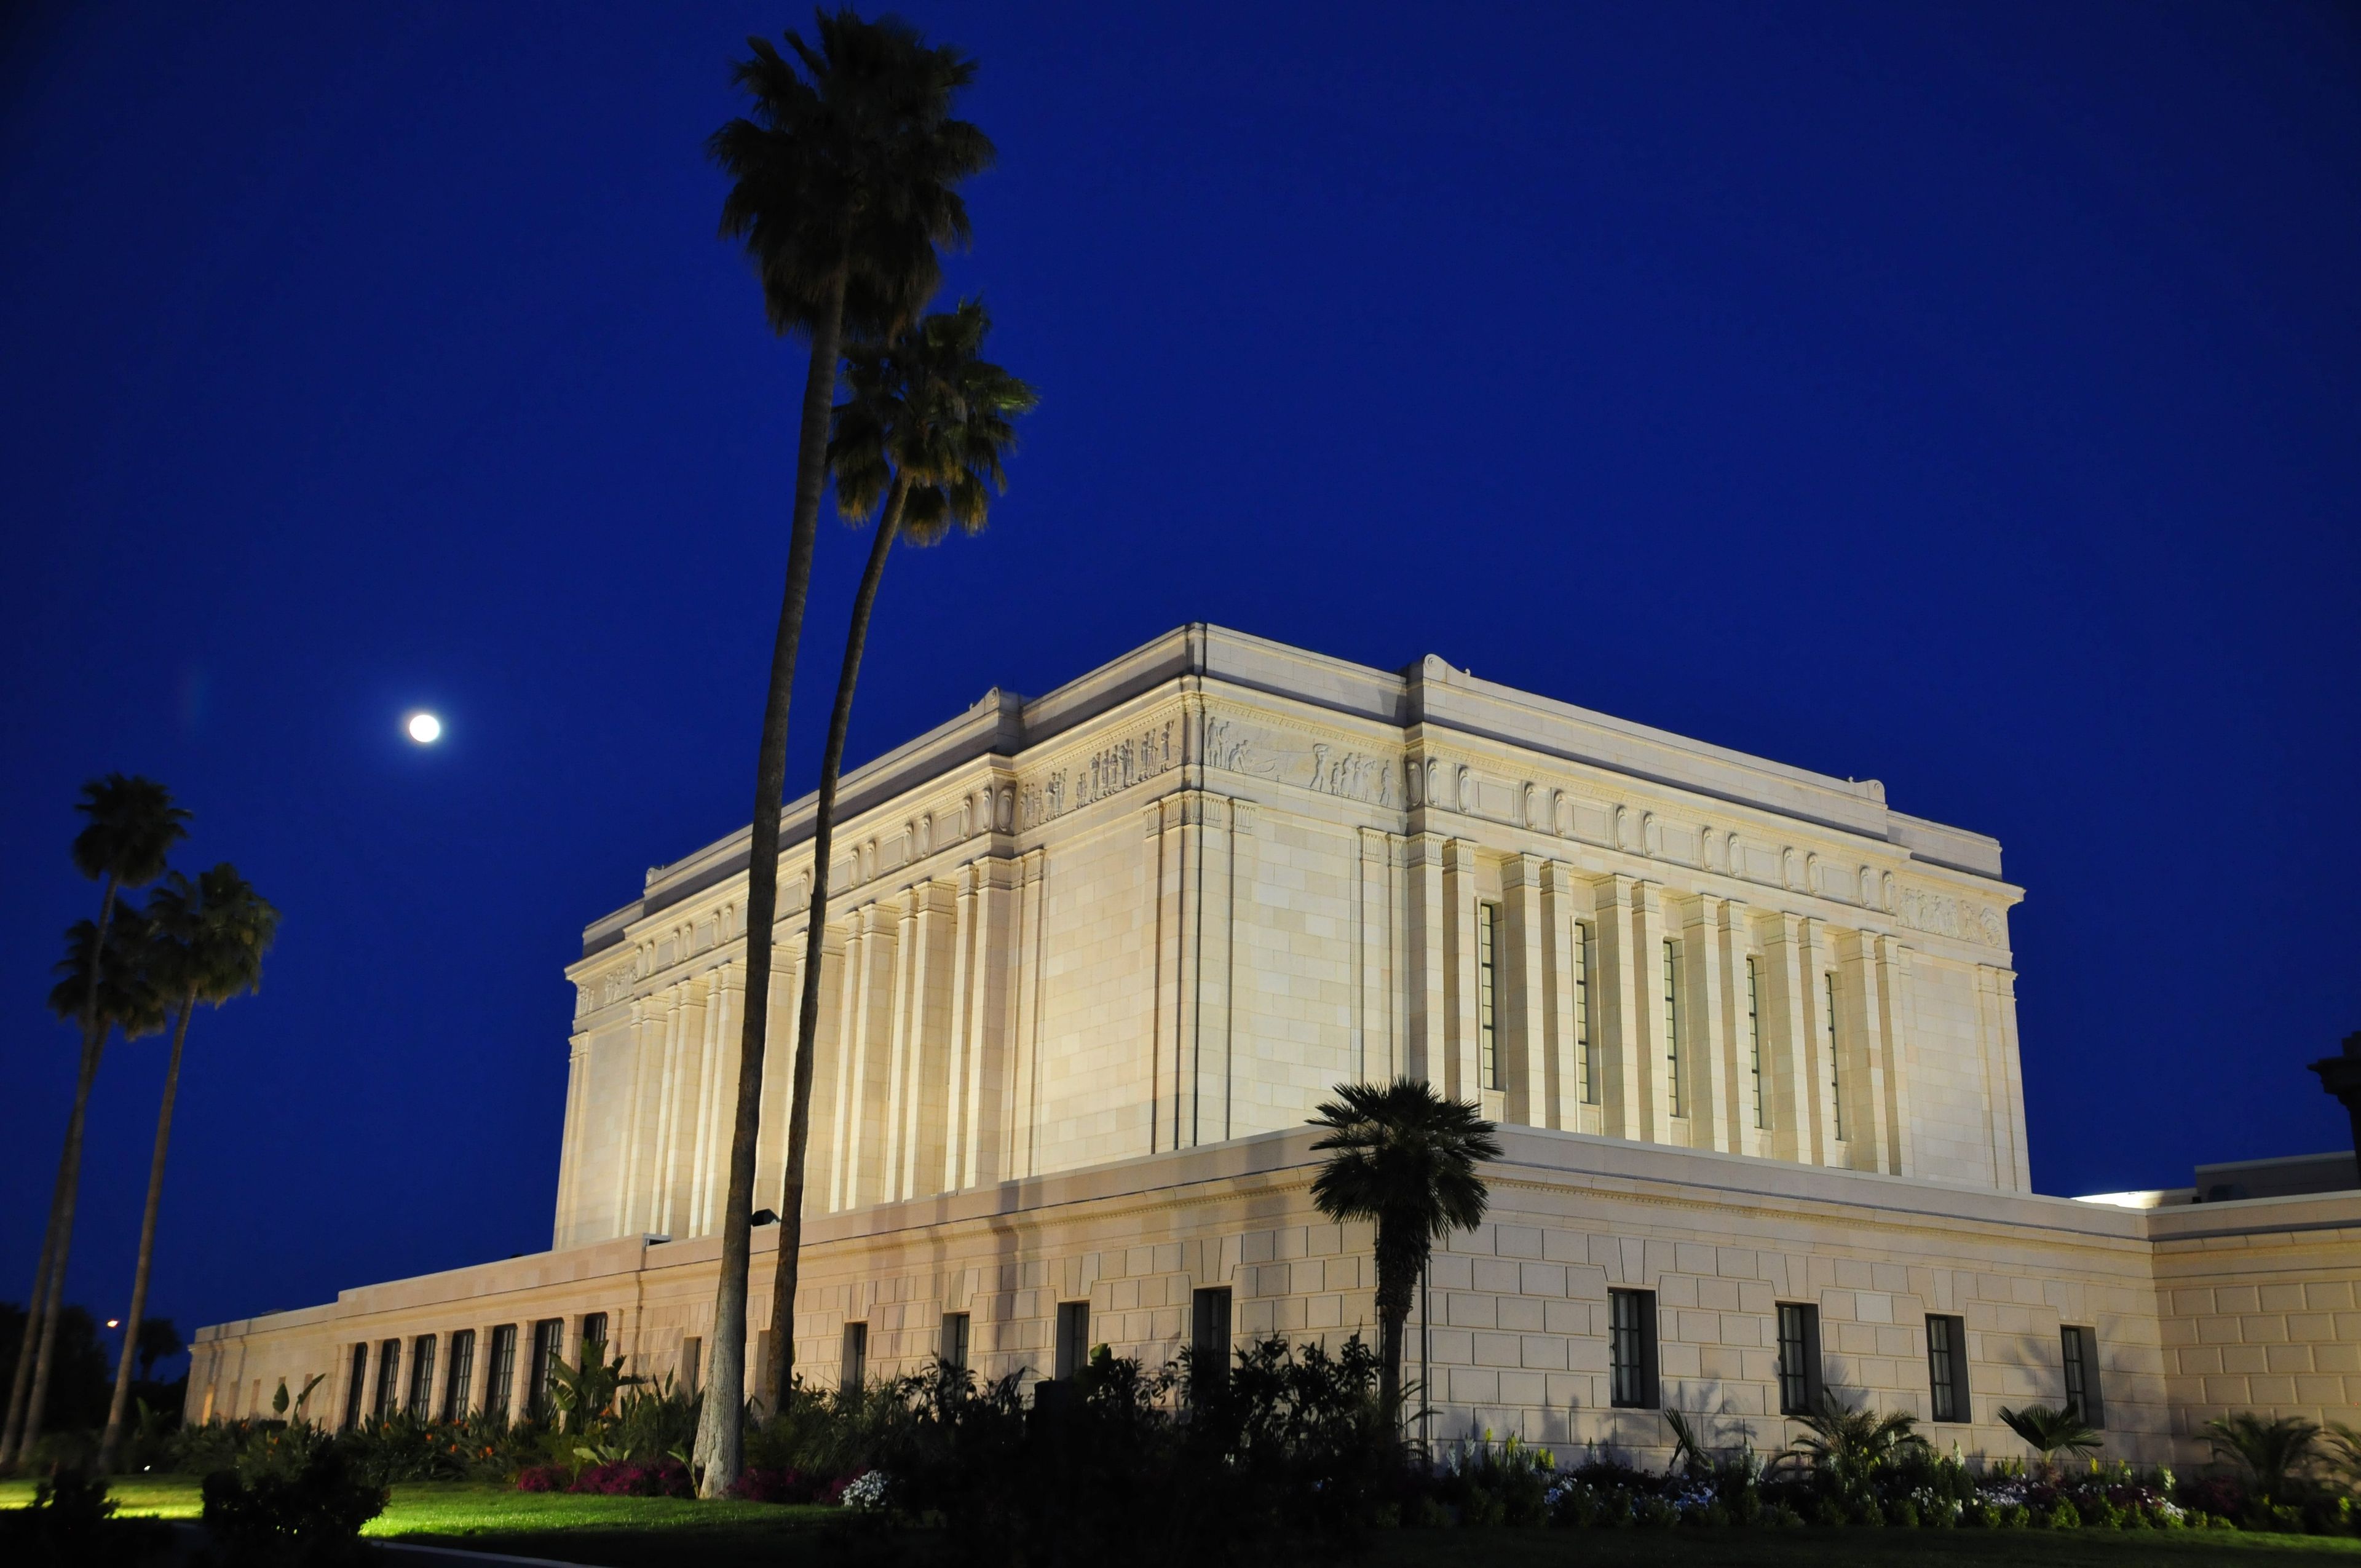 The Mesa Arizona Temple in the evening, including scenery.